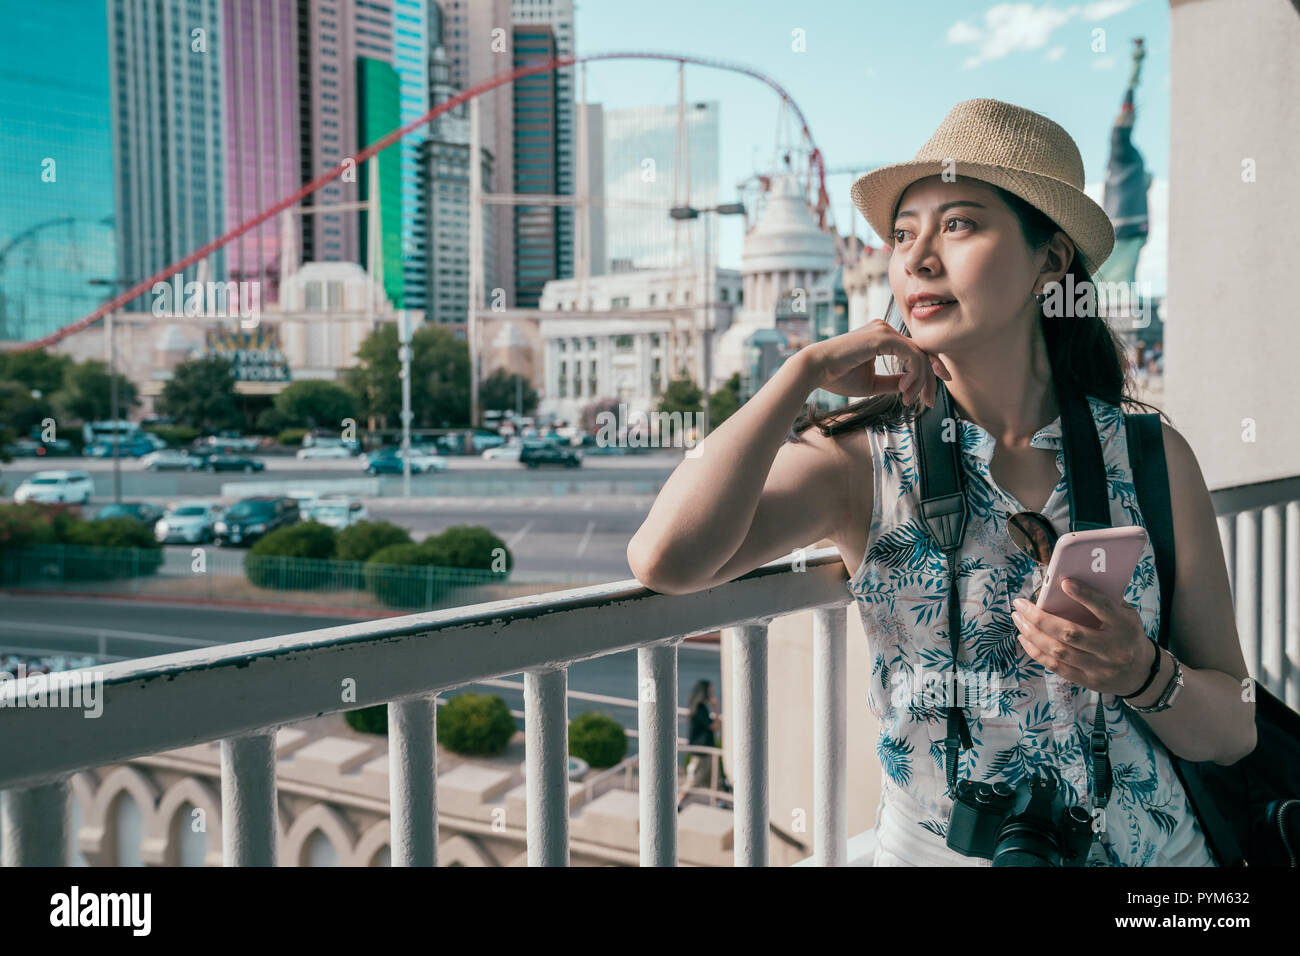 tourist woman using online guidebook on mobile phone relying on the handrail in passageway. enjoying the urban view in sunny day. travel in USA. Stock Photo